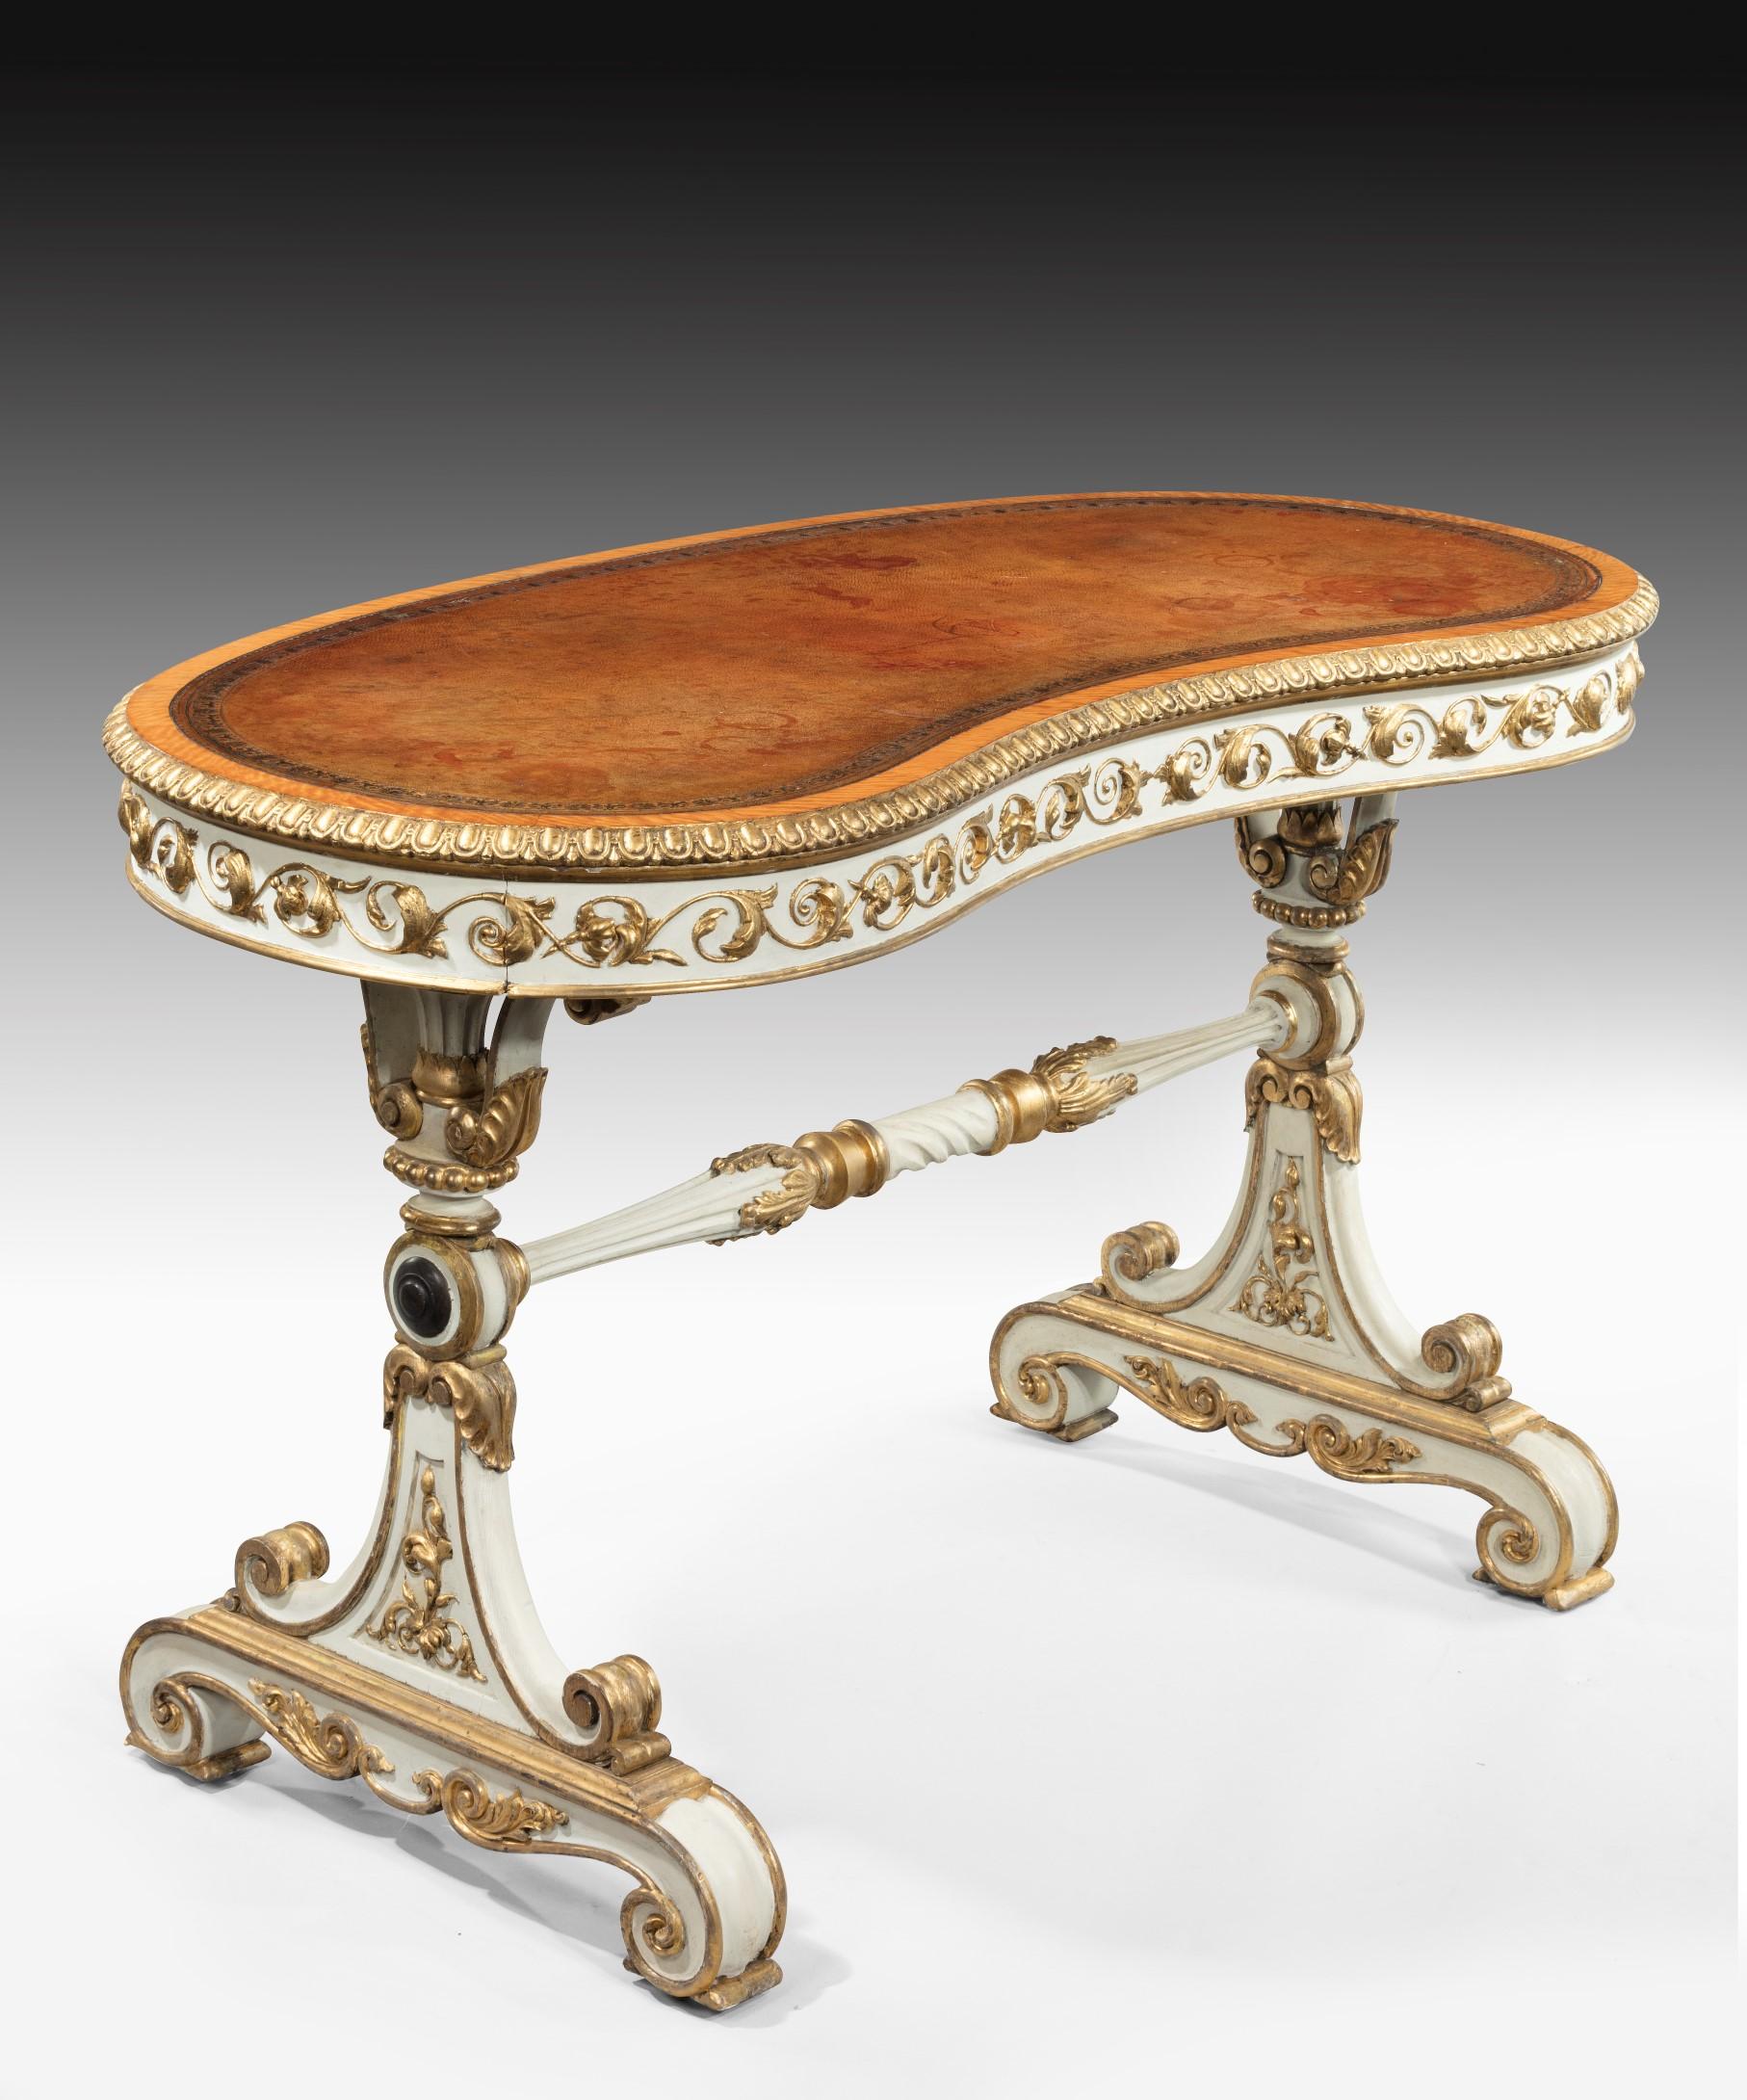 A rare William IV period kidney shaped writing table with carved giltwood decoration and white paintwork: the writing table's leathered top crossbanded in satinwood and with a carved gadrooned edge above a frieze composed of scrolling acanthus